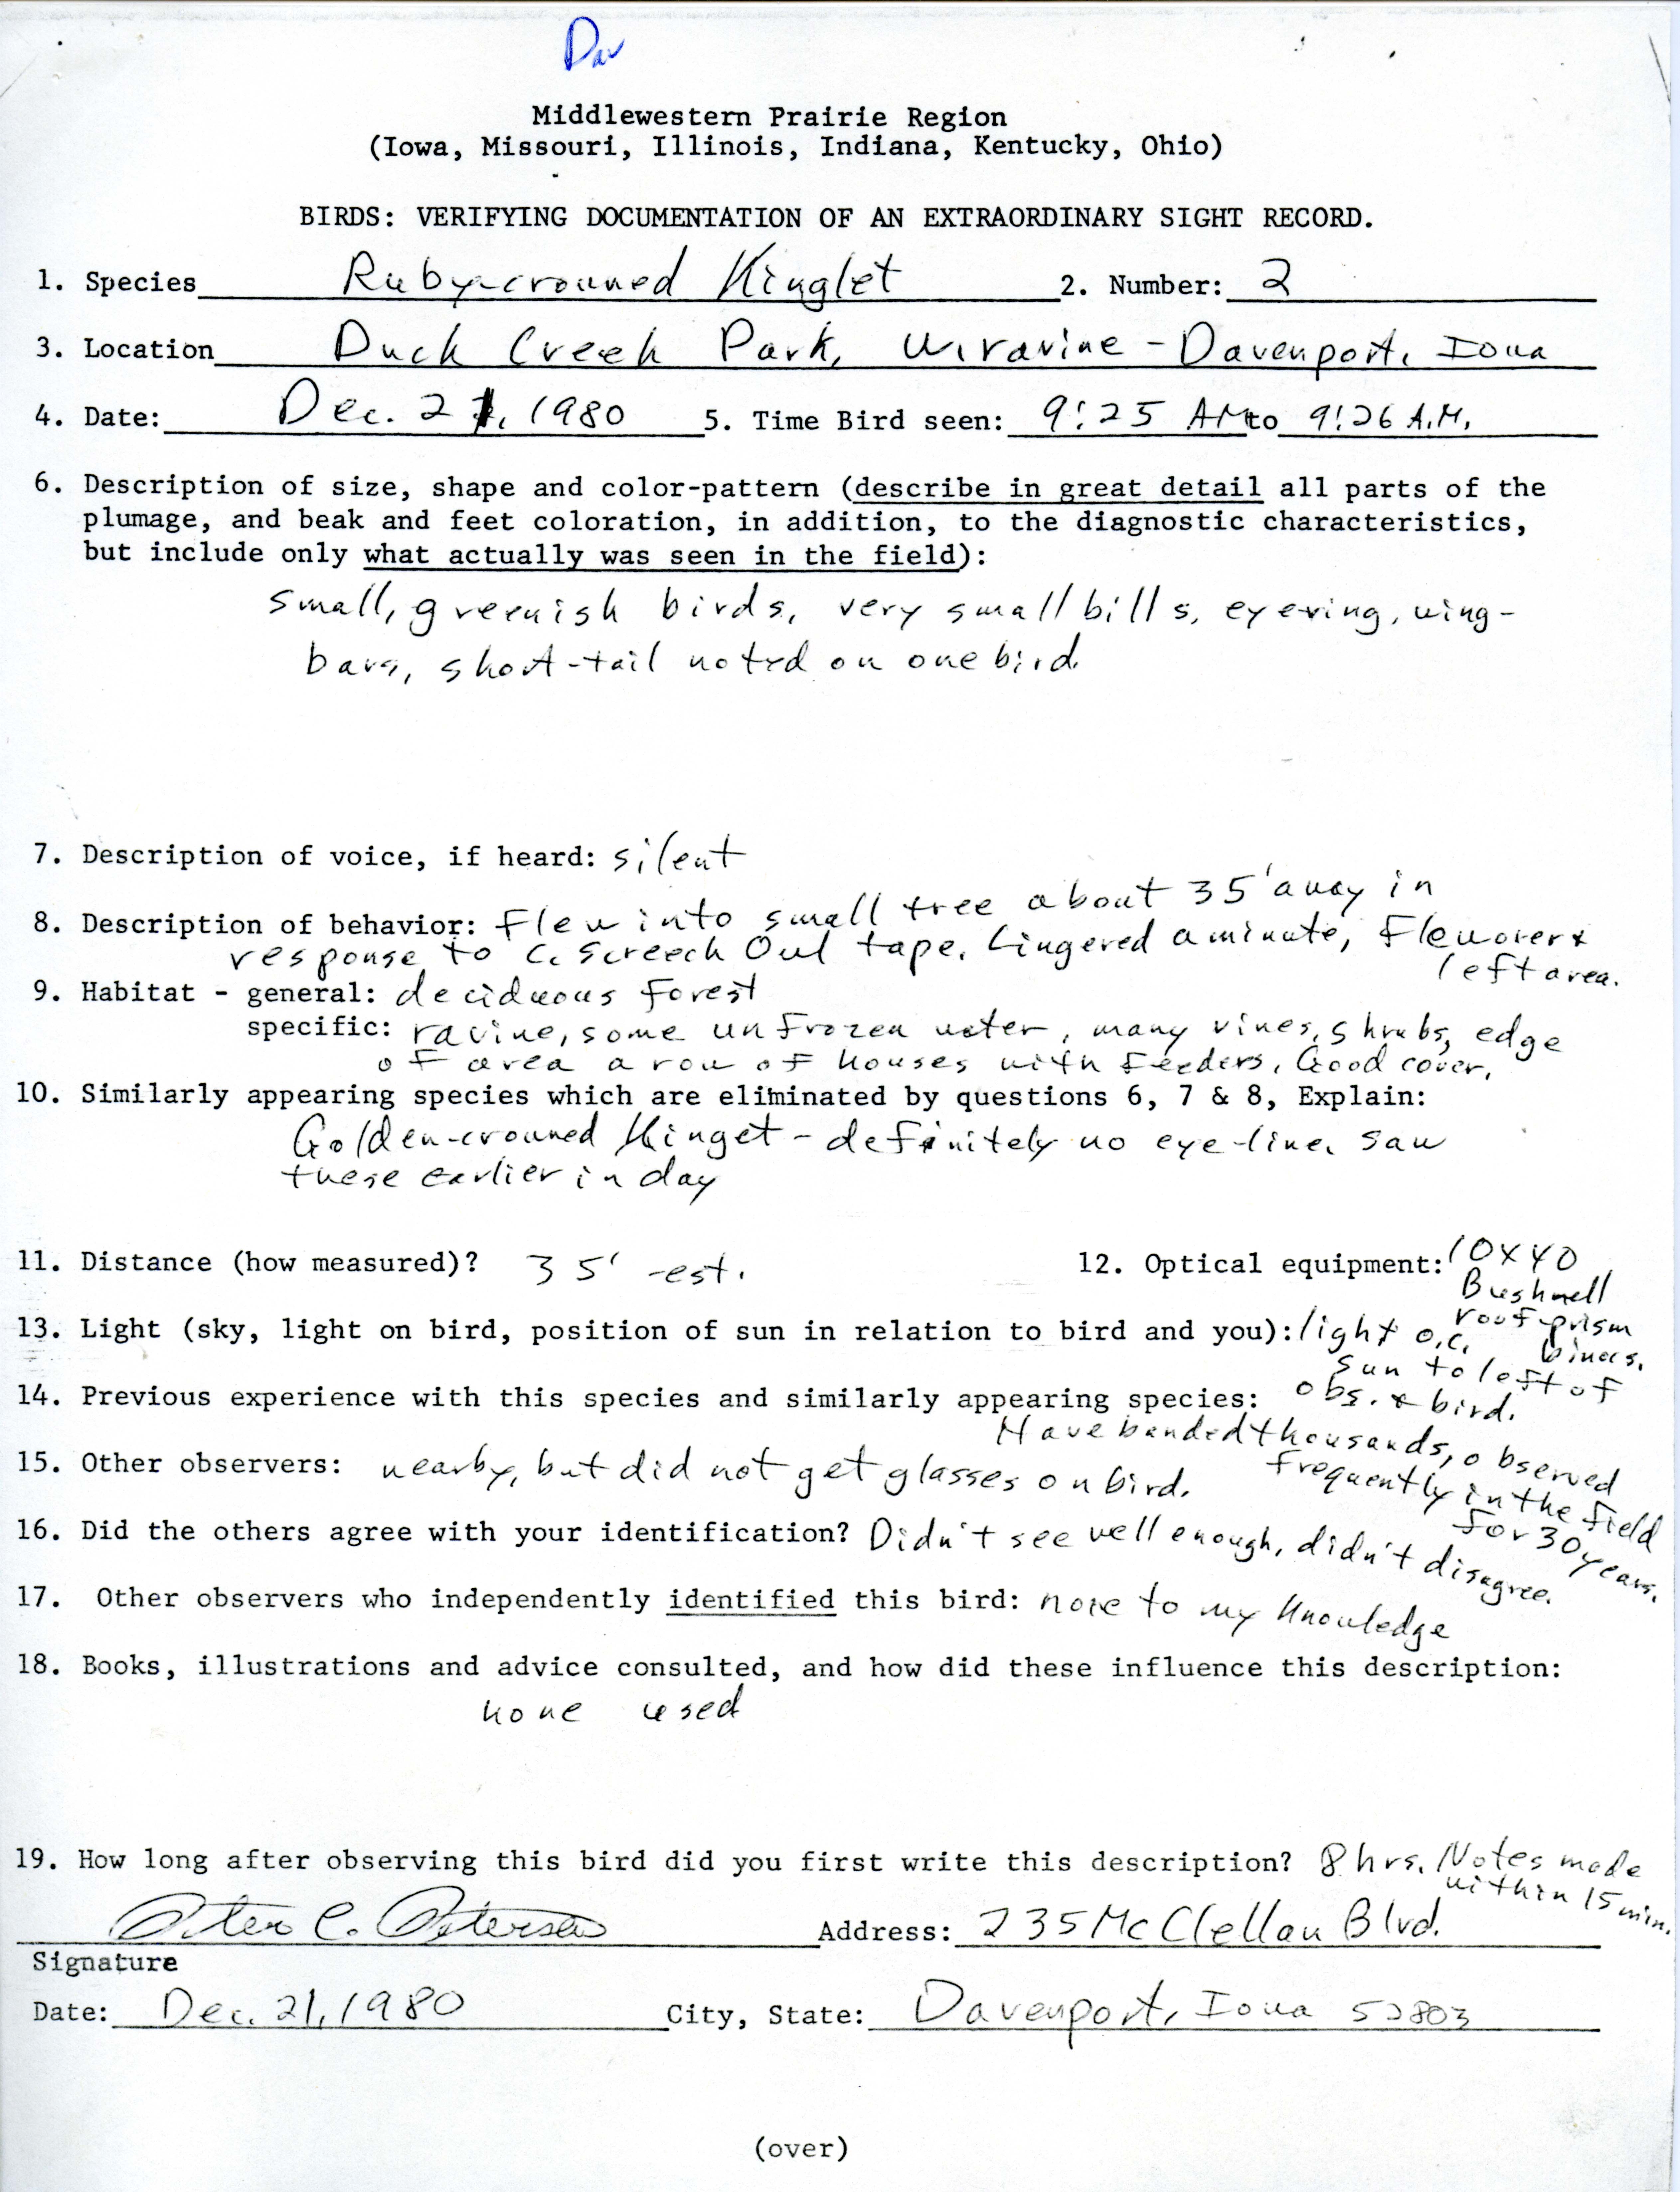 Verifying documentation form for Ruby-crowned Kinglet sighting submitted by Peter C. Peterson, December 21 1980